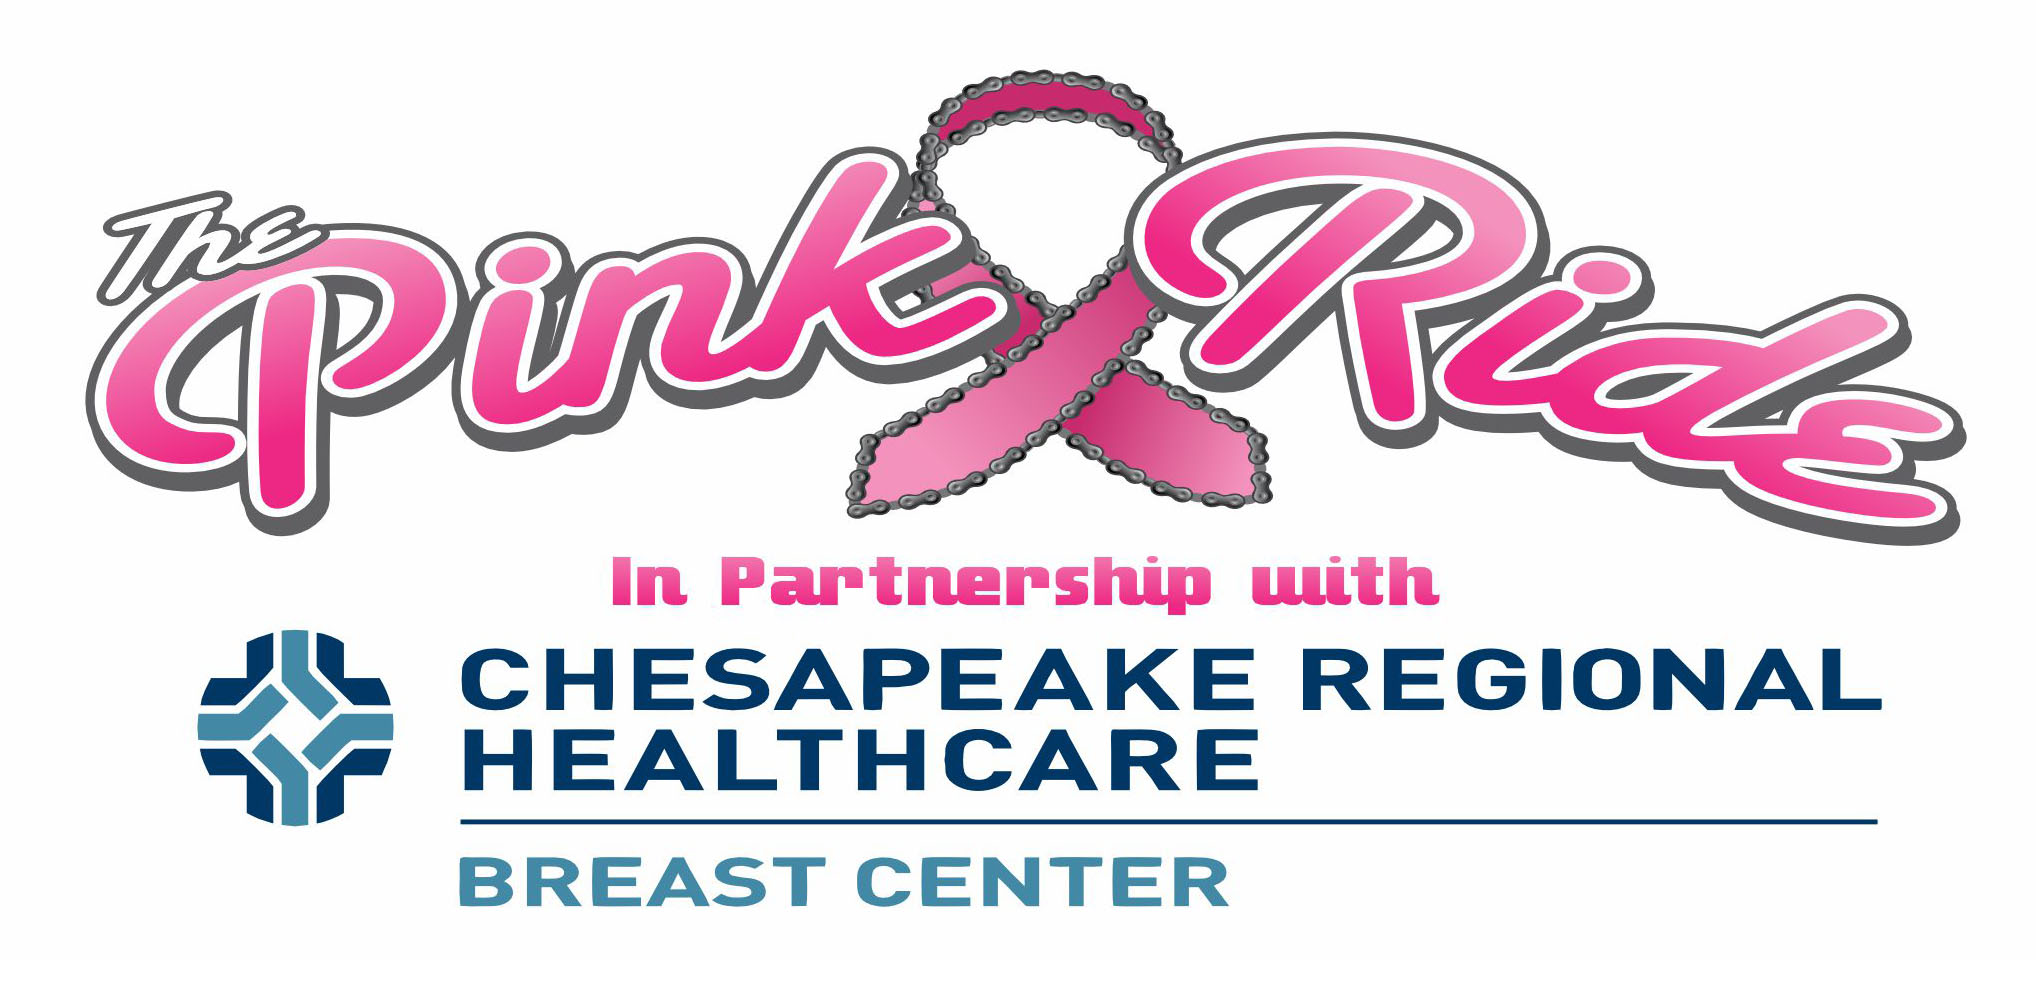 The Pink Ride and Rutter Mills Attorneys at Law, in partnership with Chesapeake Regional Health Care Breast Center